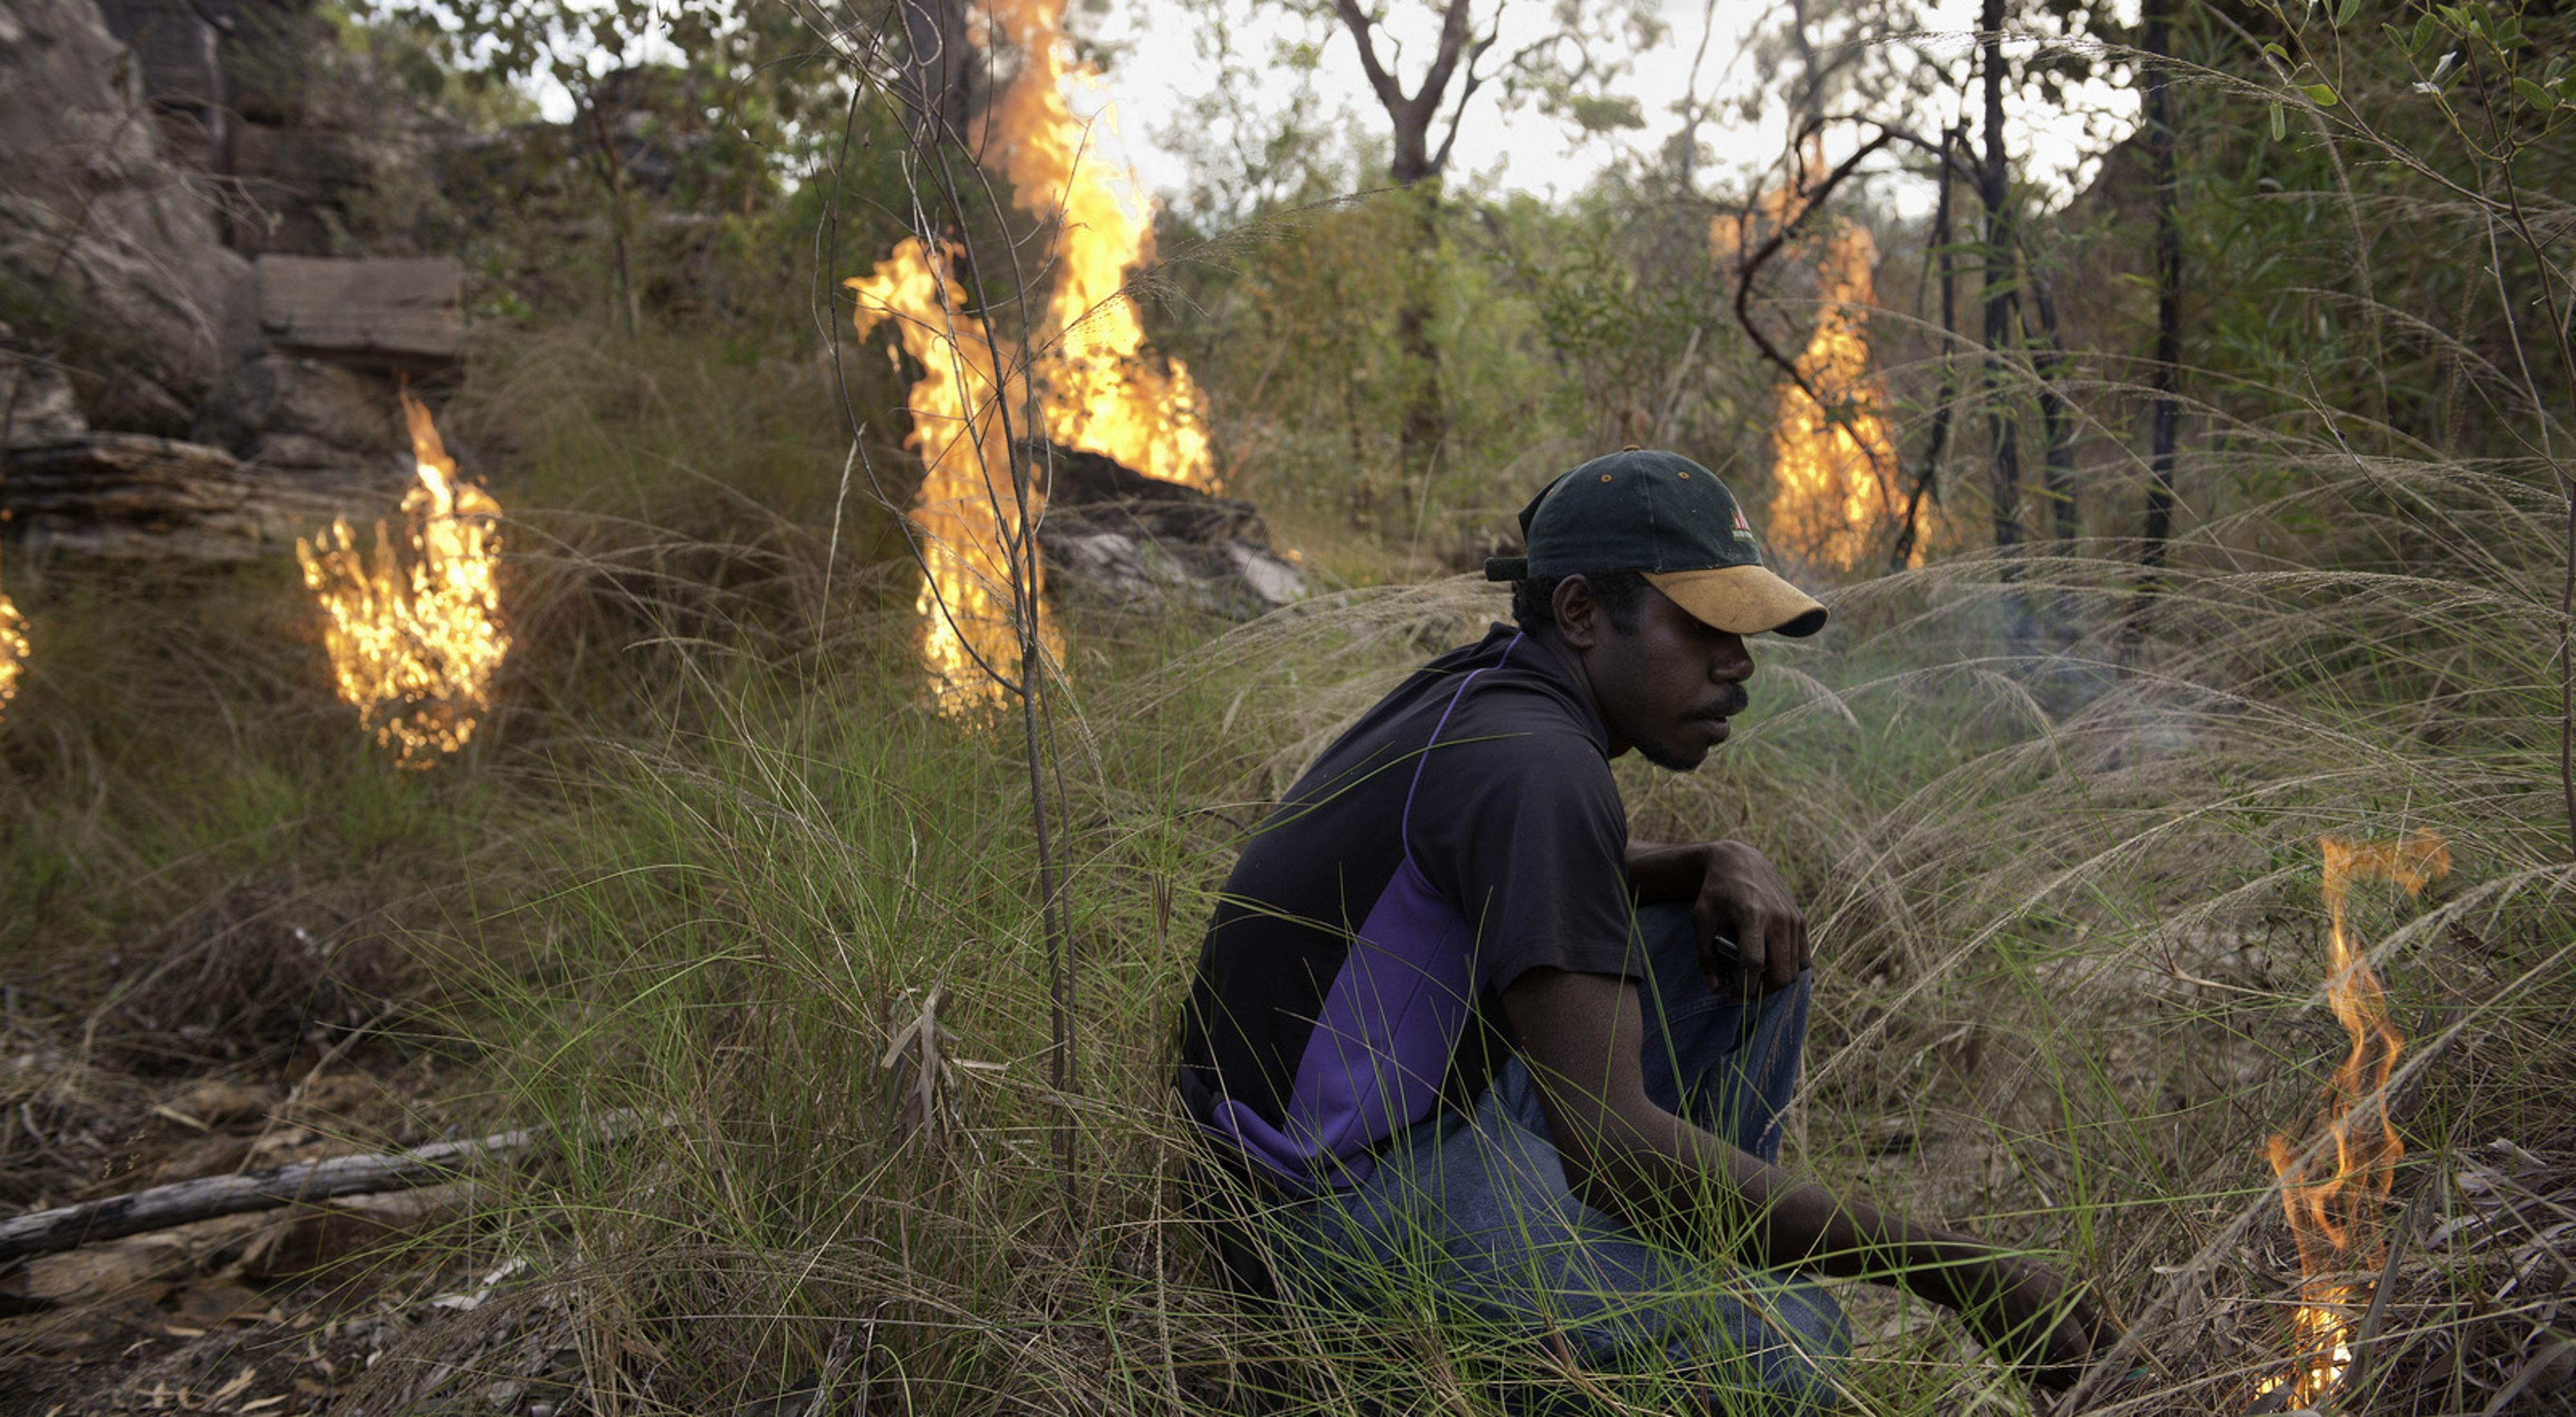 An aboriginal ranger starts an early dry season controlled burn on the Arnhem Land of Australia's Northern Territory. This fire was set during the early part of the dry season so it would burn cooler, emit less carbon, then a similar fire during the late dry season would produce. The fire is also set to remove fuel from areas close to traditional aboriginal rock art sites. The Nature Conservancy is working with and supporting both Australian government and non-government organizations in assisting the indigenous people of the Northern Territory to preserve and manage their native homelands.   